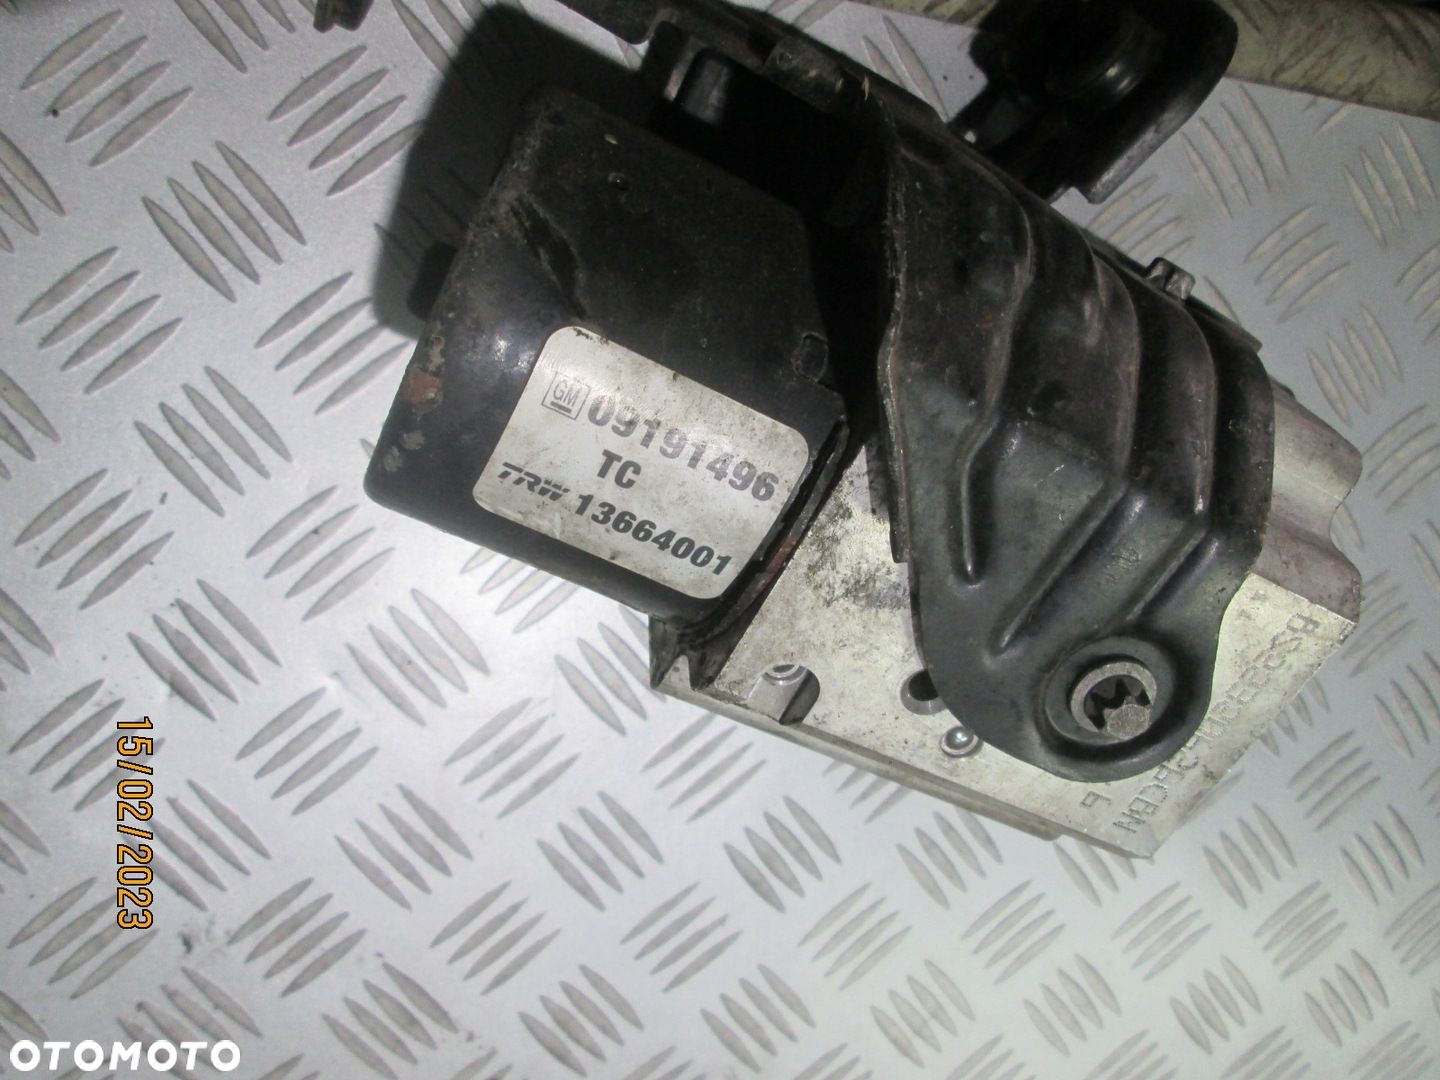 POMPA ABS OPEL VECTRA C SIGNUM 09191496 13664001 - 4